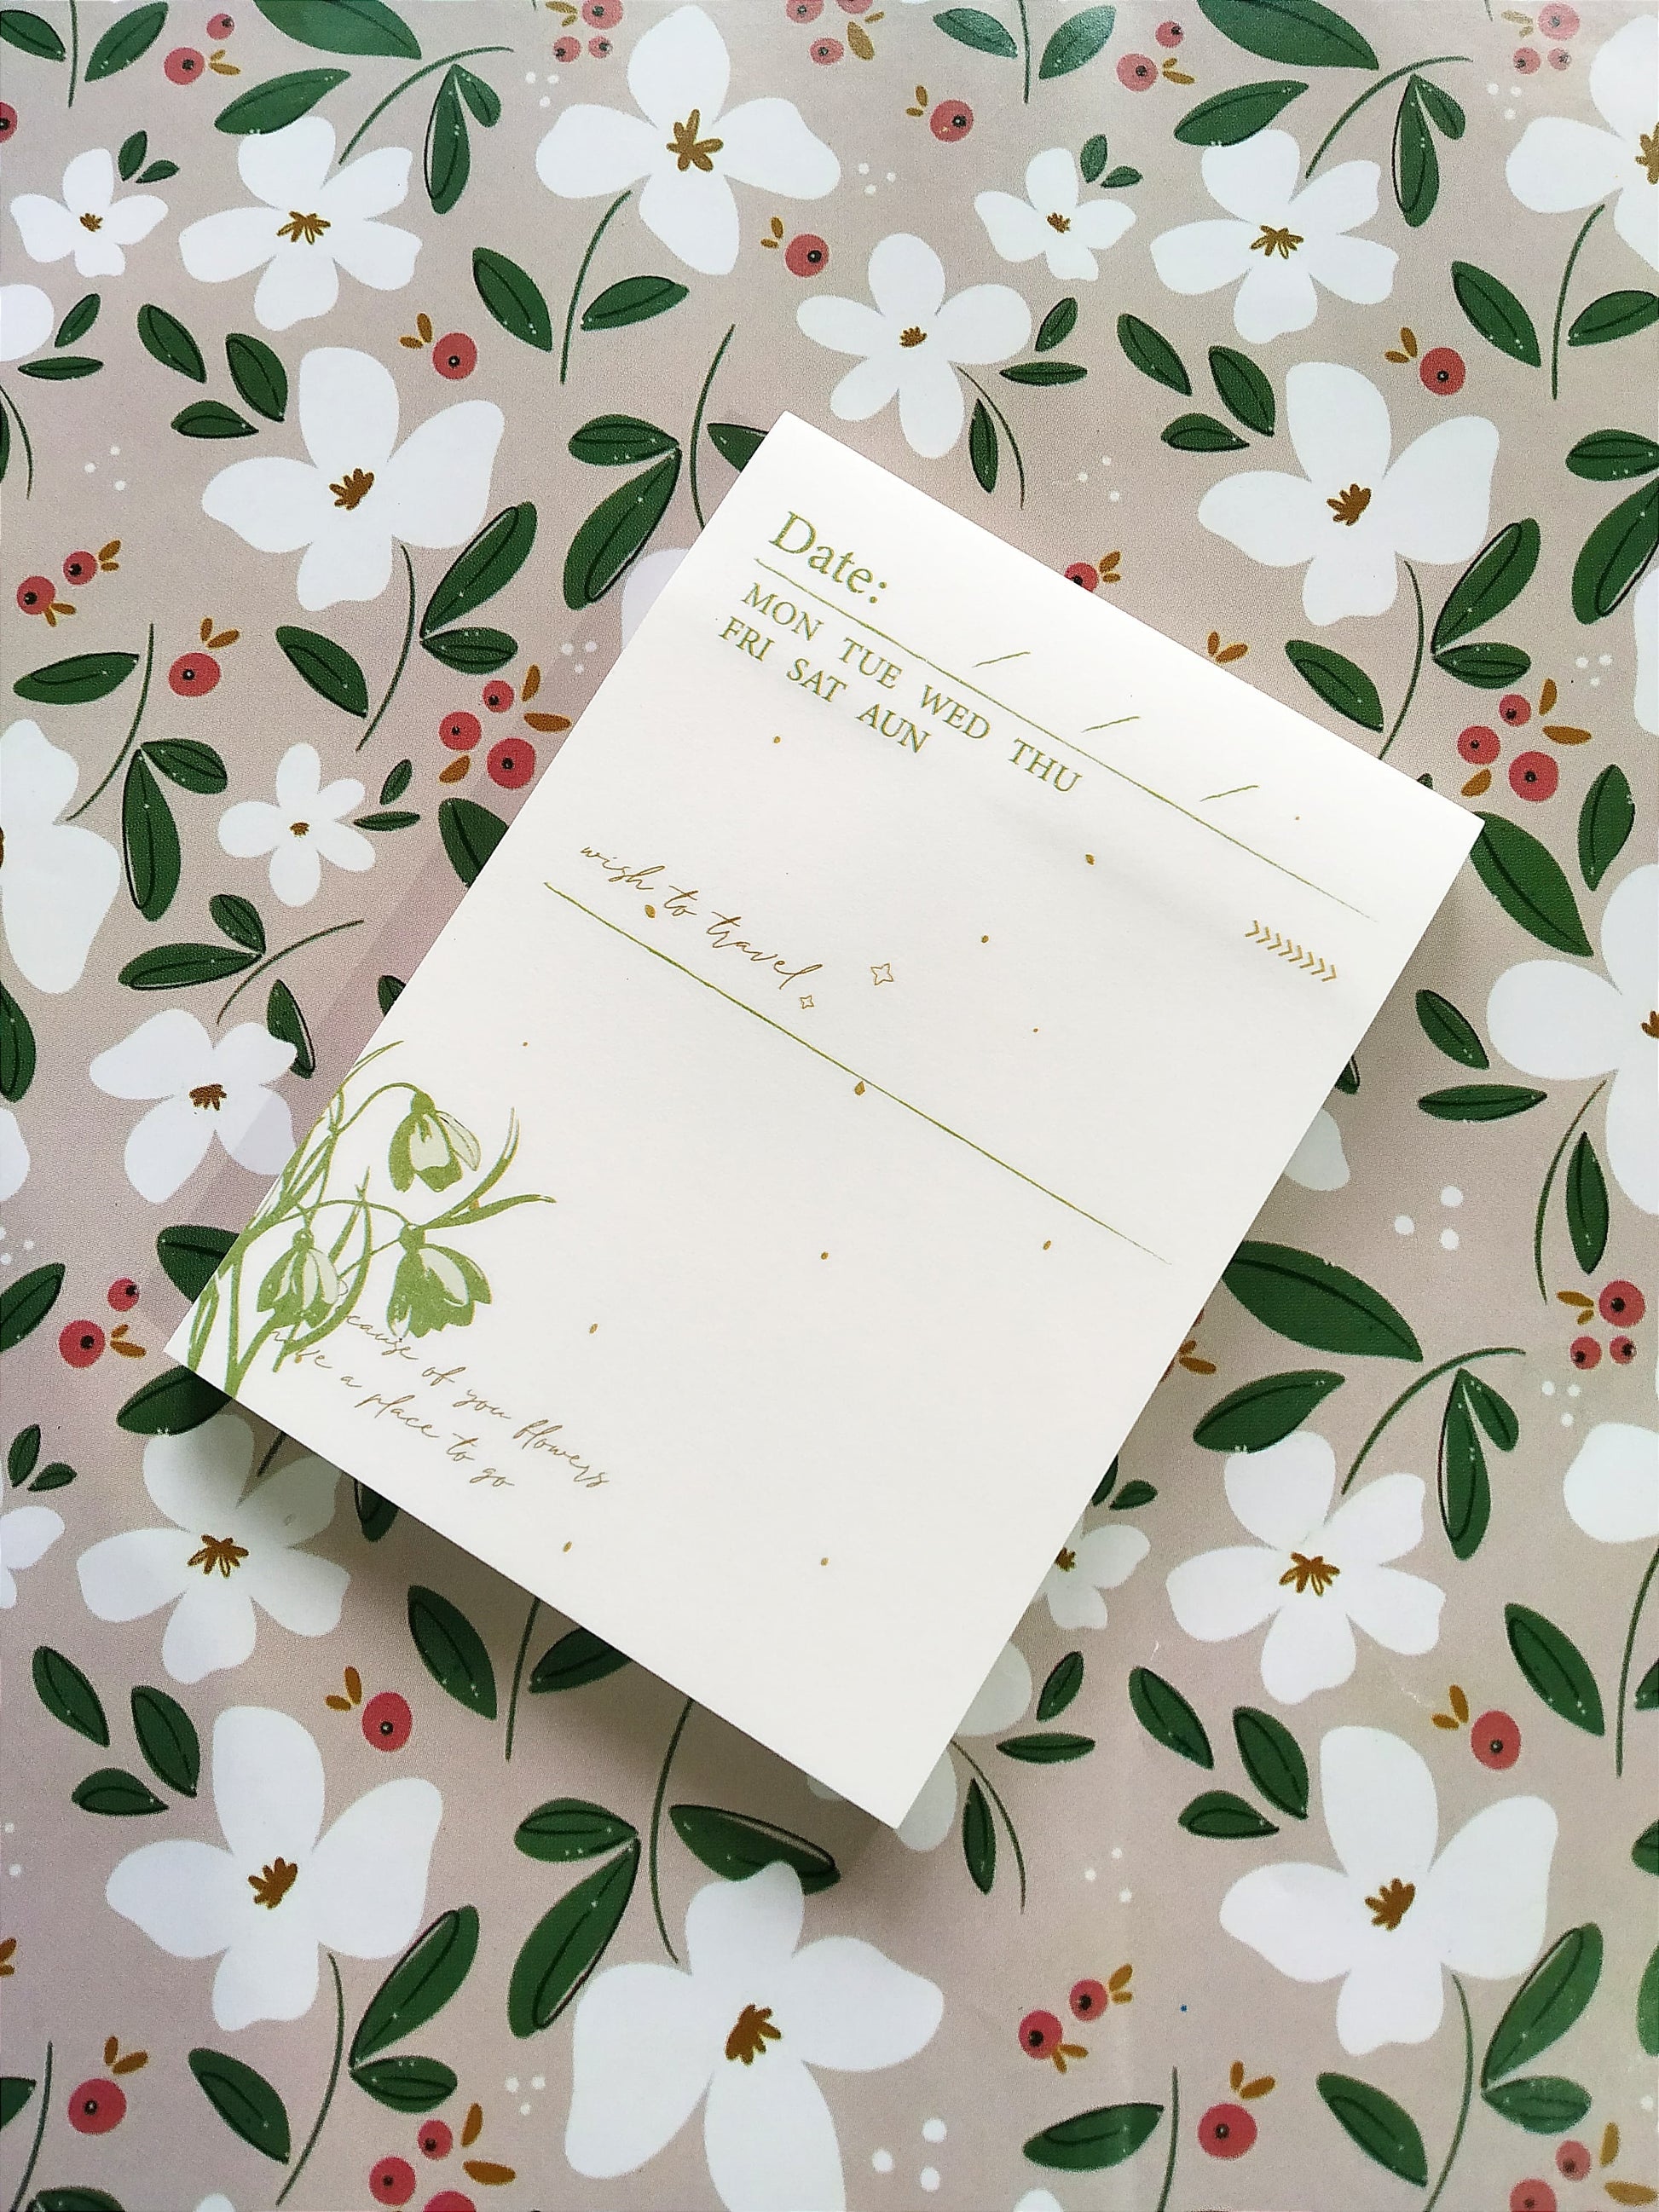 RUSHAB NOVELTY Sticky Notes Date wise Botanical floral edition Sticky Notes I To do list types post it I Journaling notes